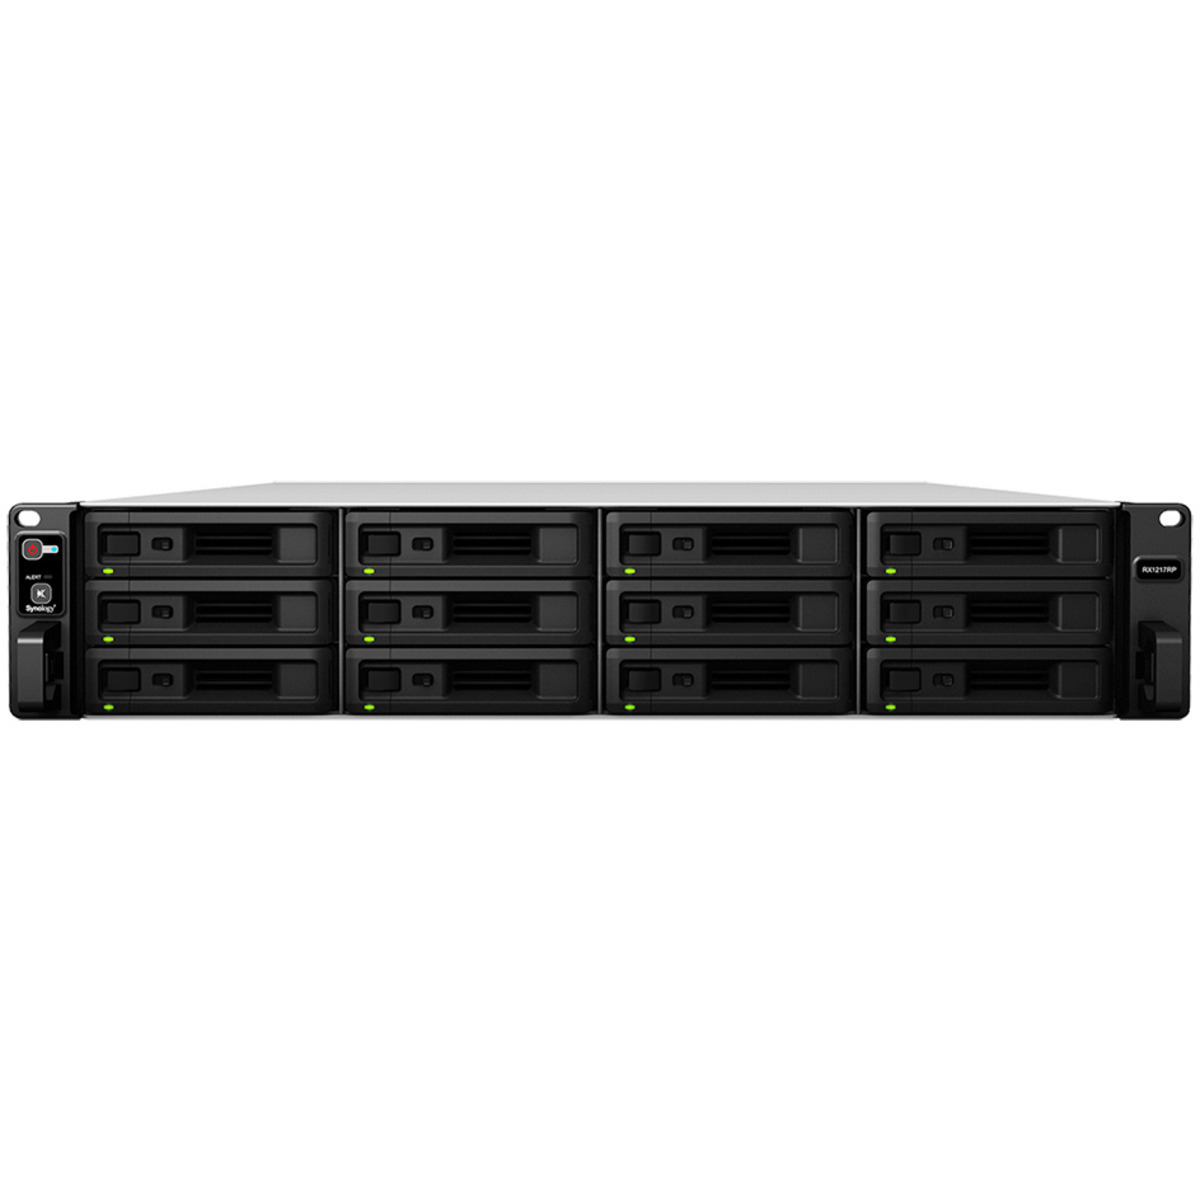 Synology RX1217RP External Expansion Drive 11tb 12-Bay RackMount Large Business / Enterprise Expansion Enclosure 11x1tb Samsung 870 EVO MZ-77E1T0BAM 2.5 560/530MB/s SATA 6Gb/s SSD CONSUMER Class Drives Installed - Burn-In Tested RX1217RP External Expansion Drive